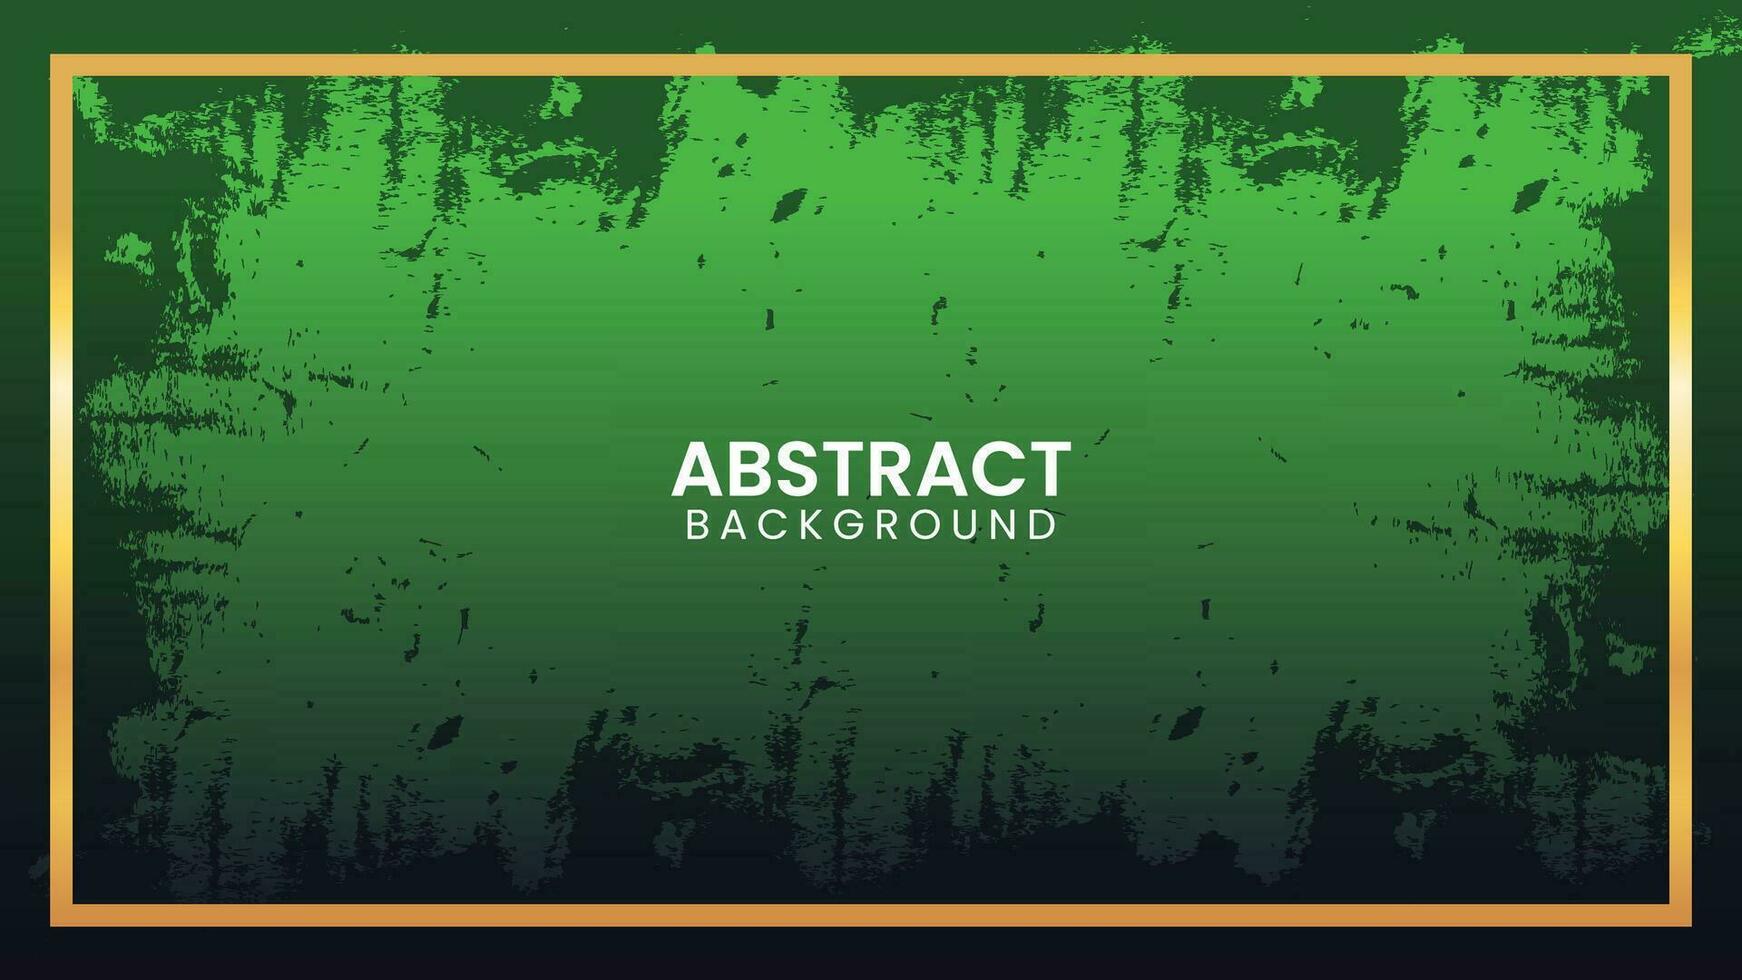 Abstract Green Background Design Template vector